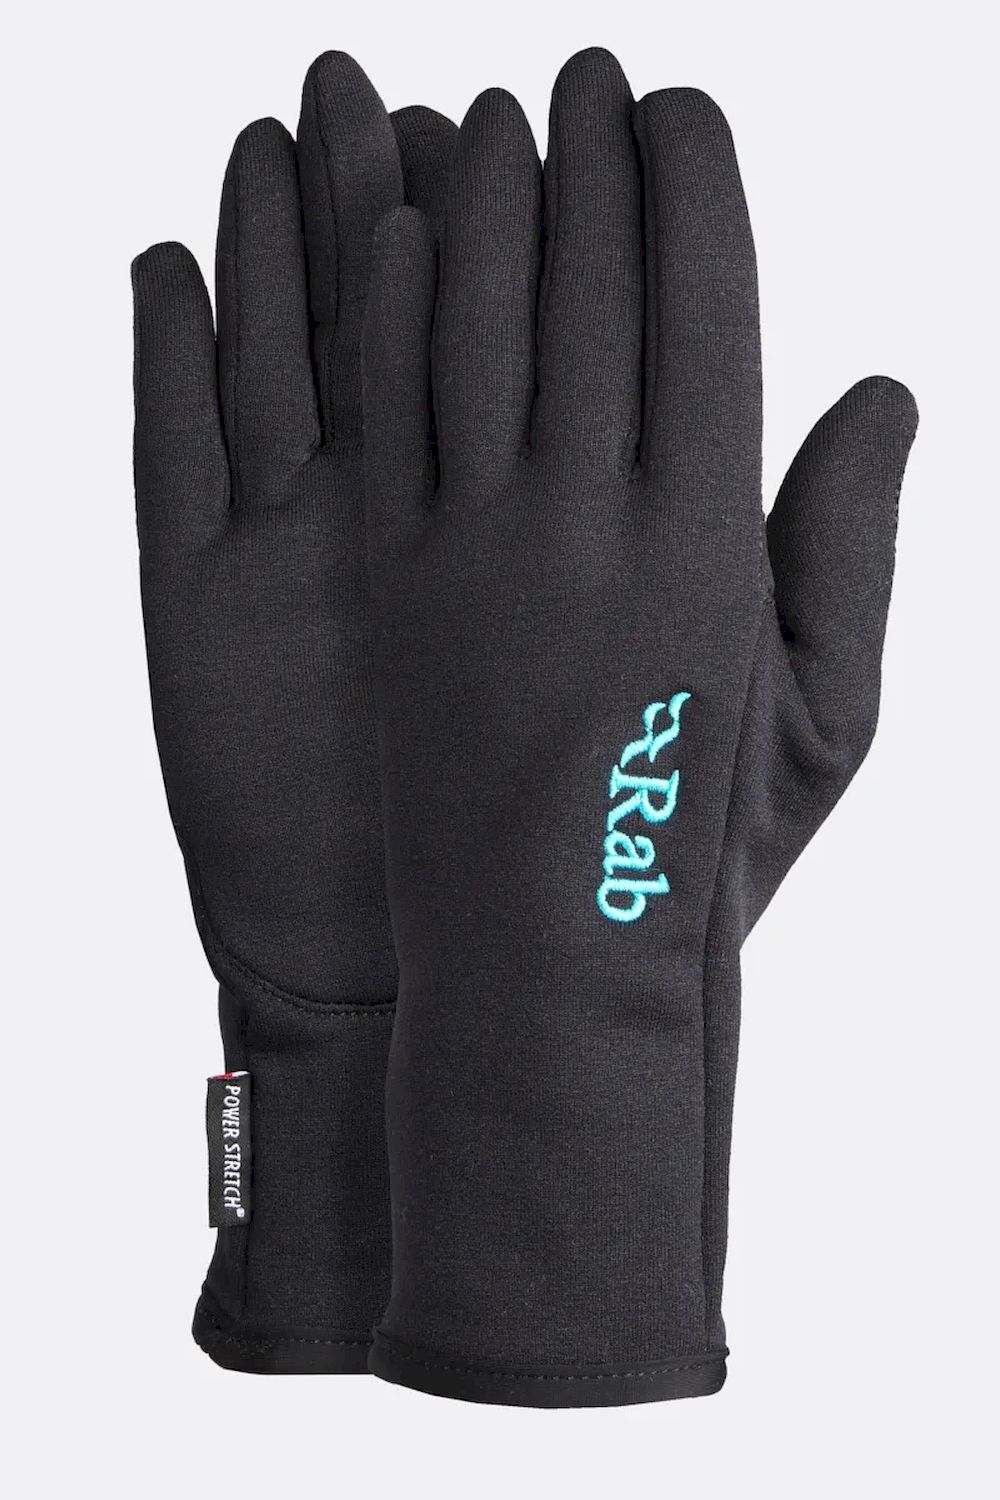 Rab Power Stretch Pro Glove  - Guantes trekking - Mujer